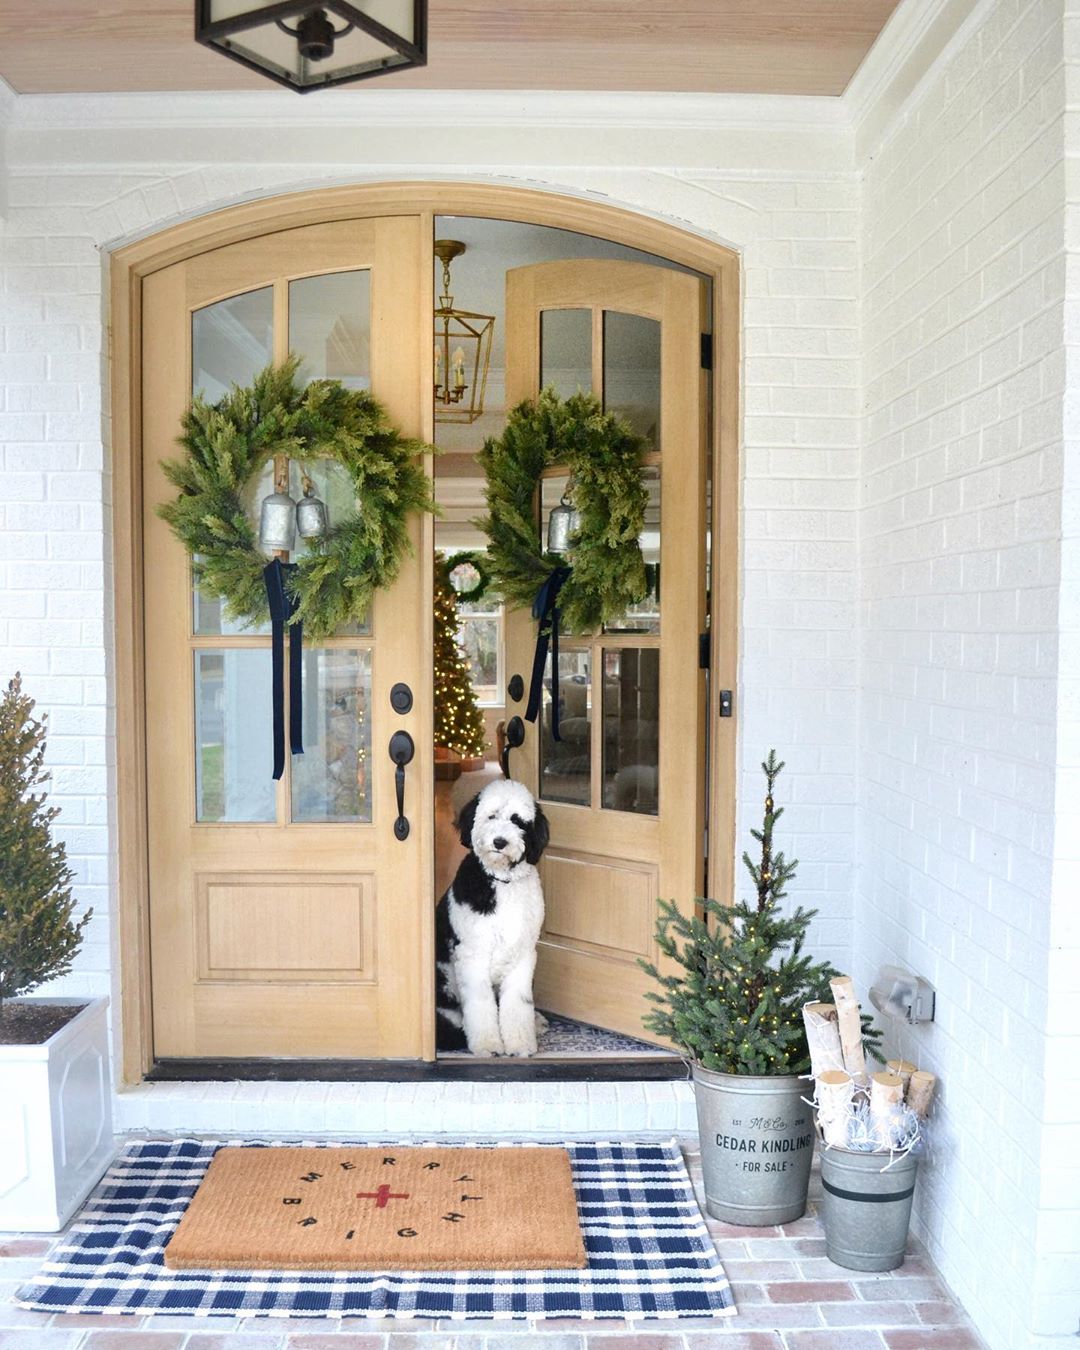 Holiday wreaths on front doors of white farmhouse with gorgeous metal roof. Charming inspiration if you love white painted house exteriors! #whitehouses #housedesign #exteriors #whitefarmhouse #holidaydecor #frontdoordecor #christmaswreaths